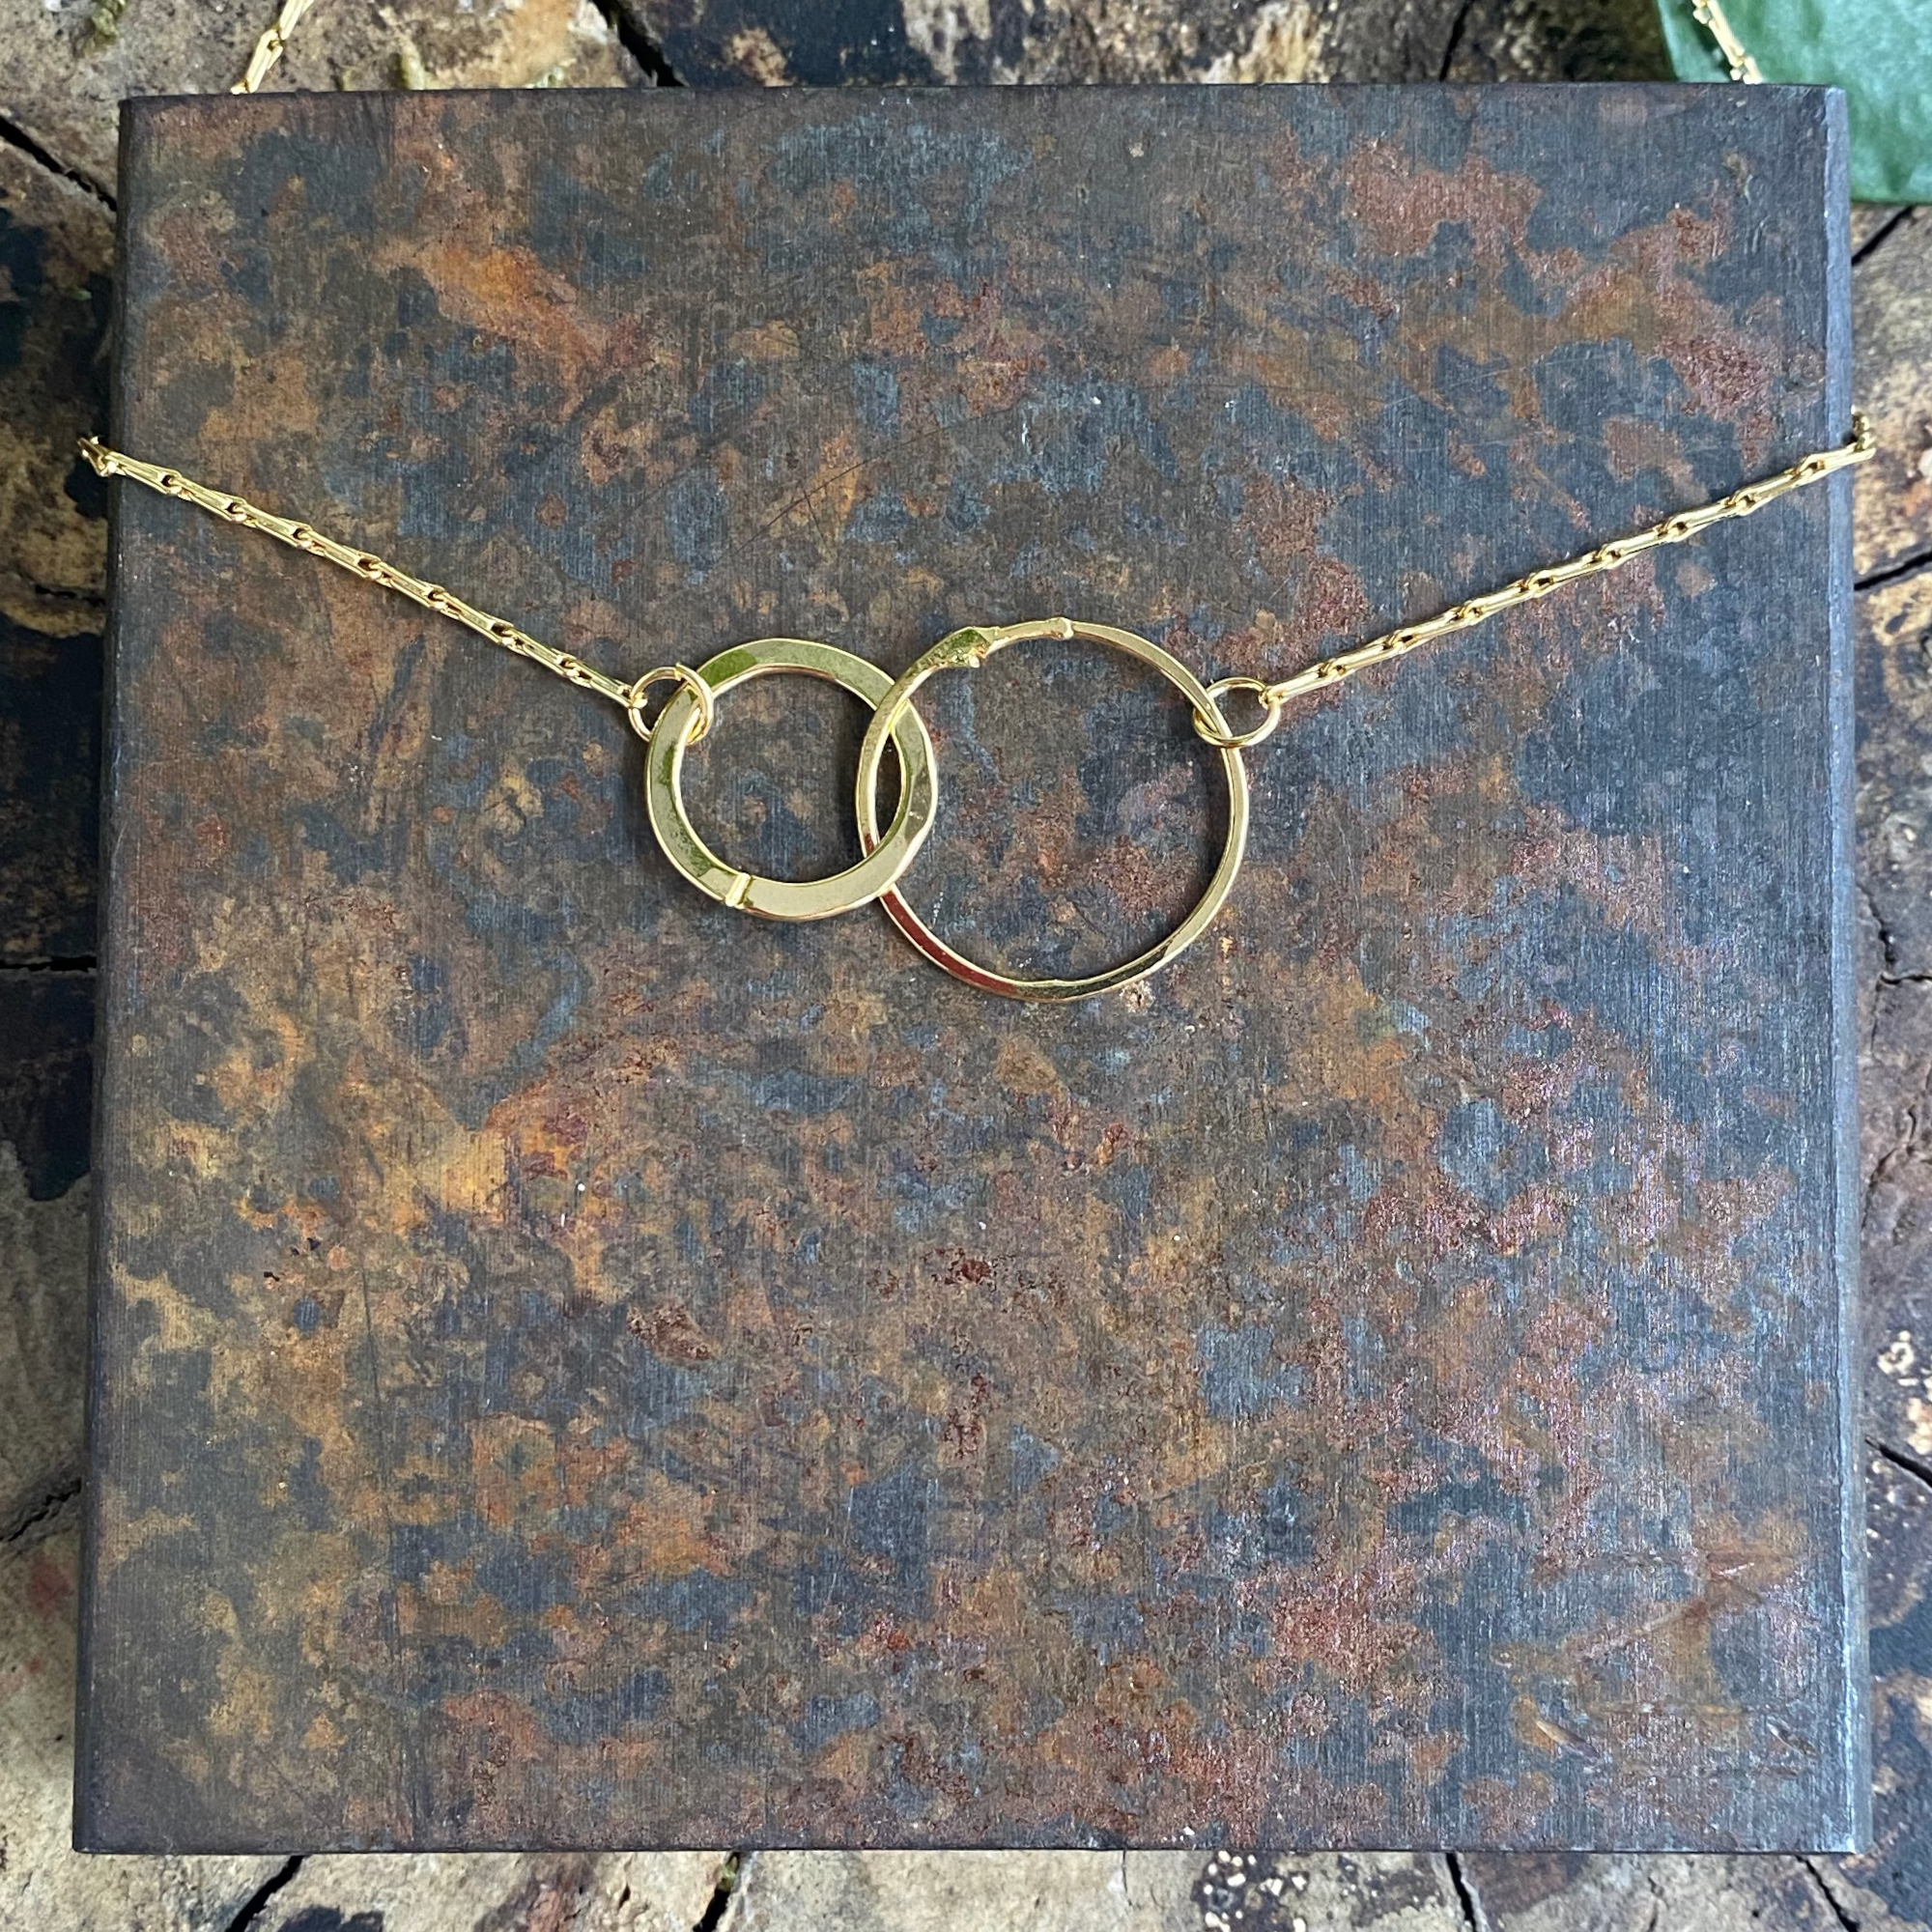 Endless Necklace - Single, Double, and Triple Link